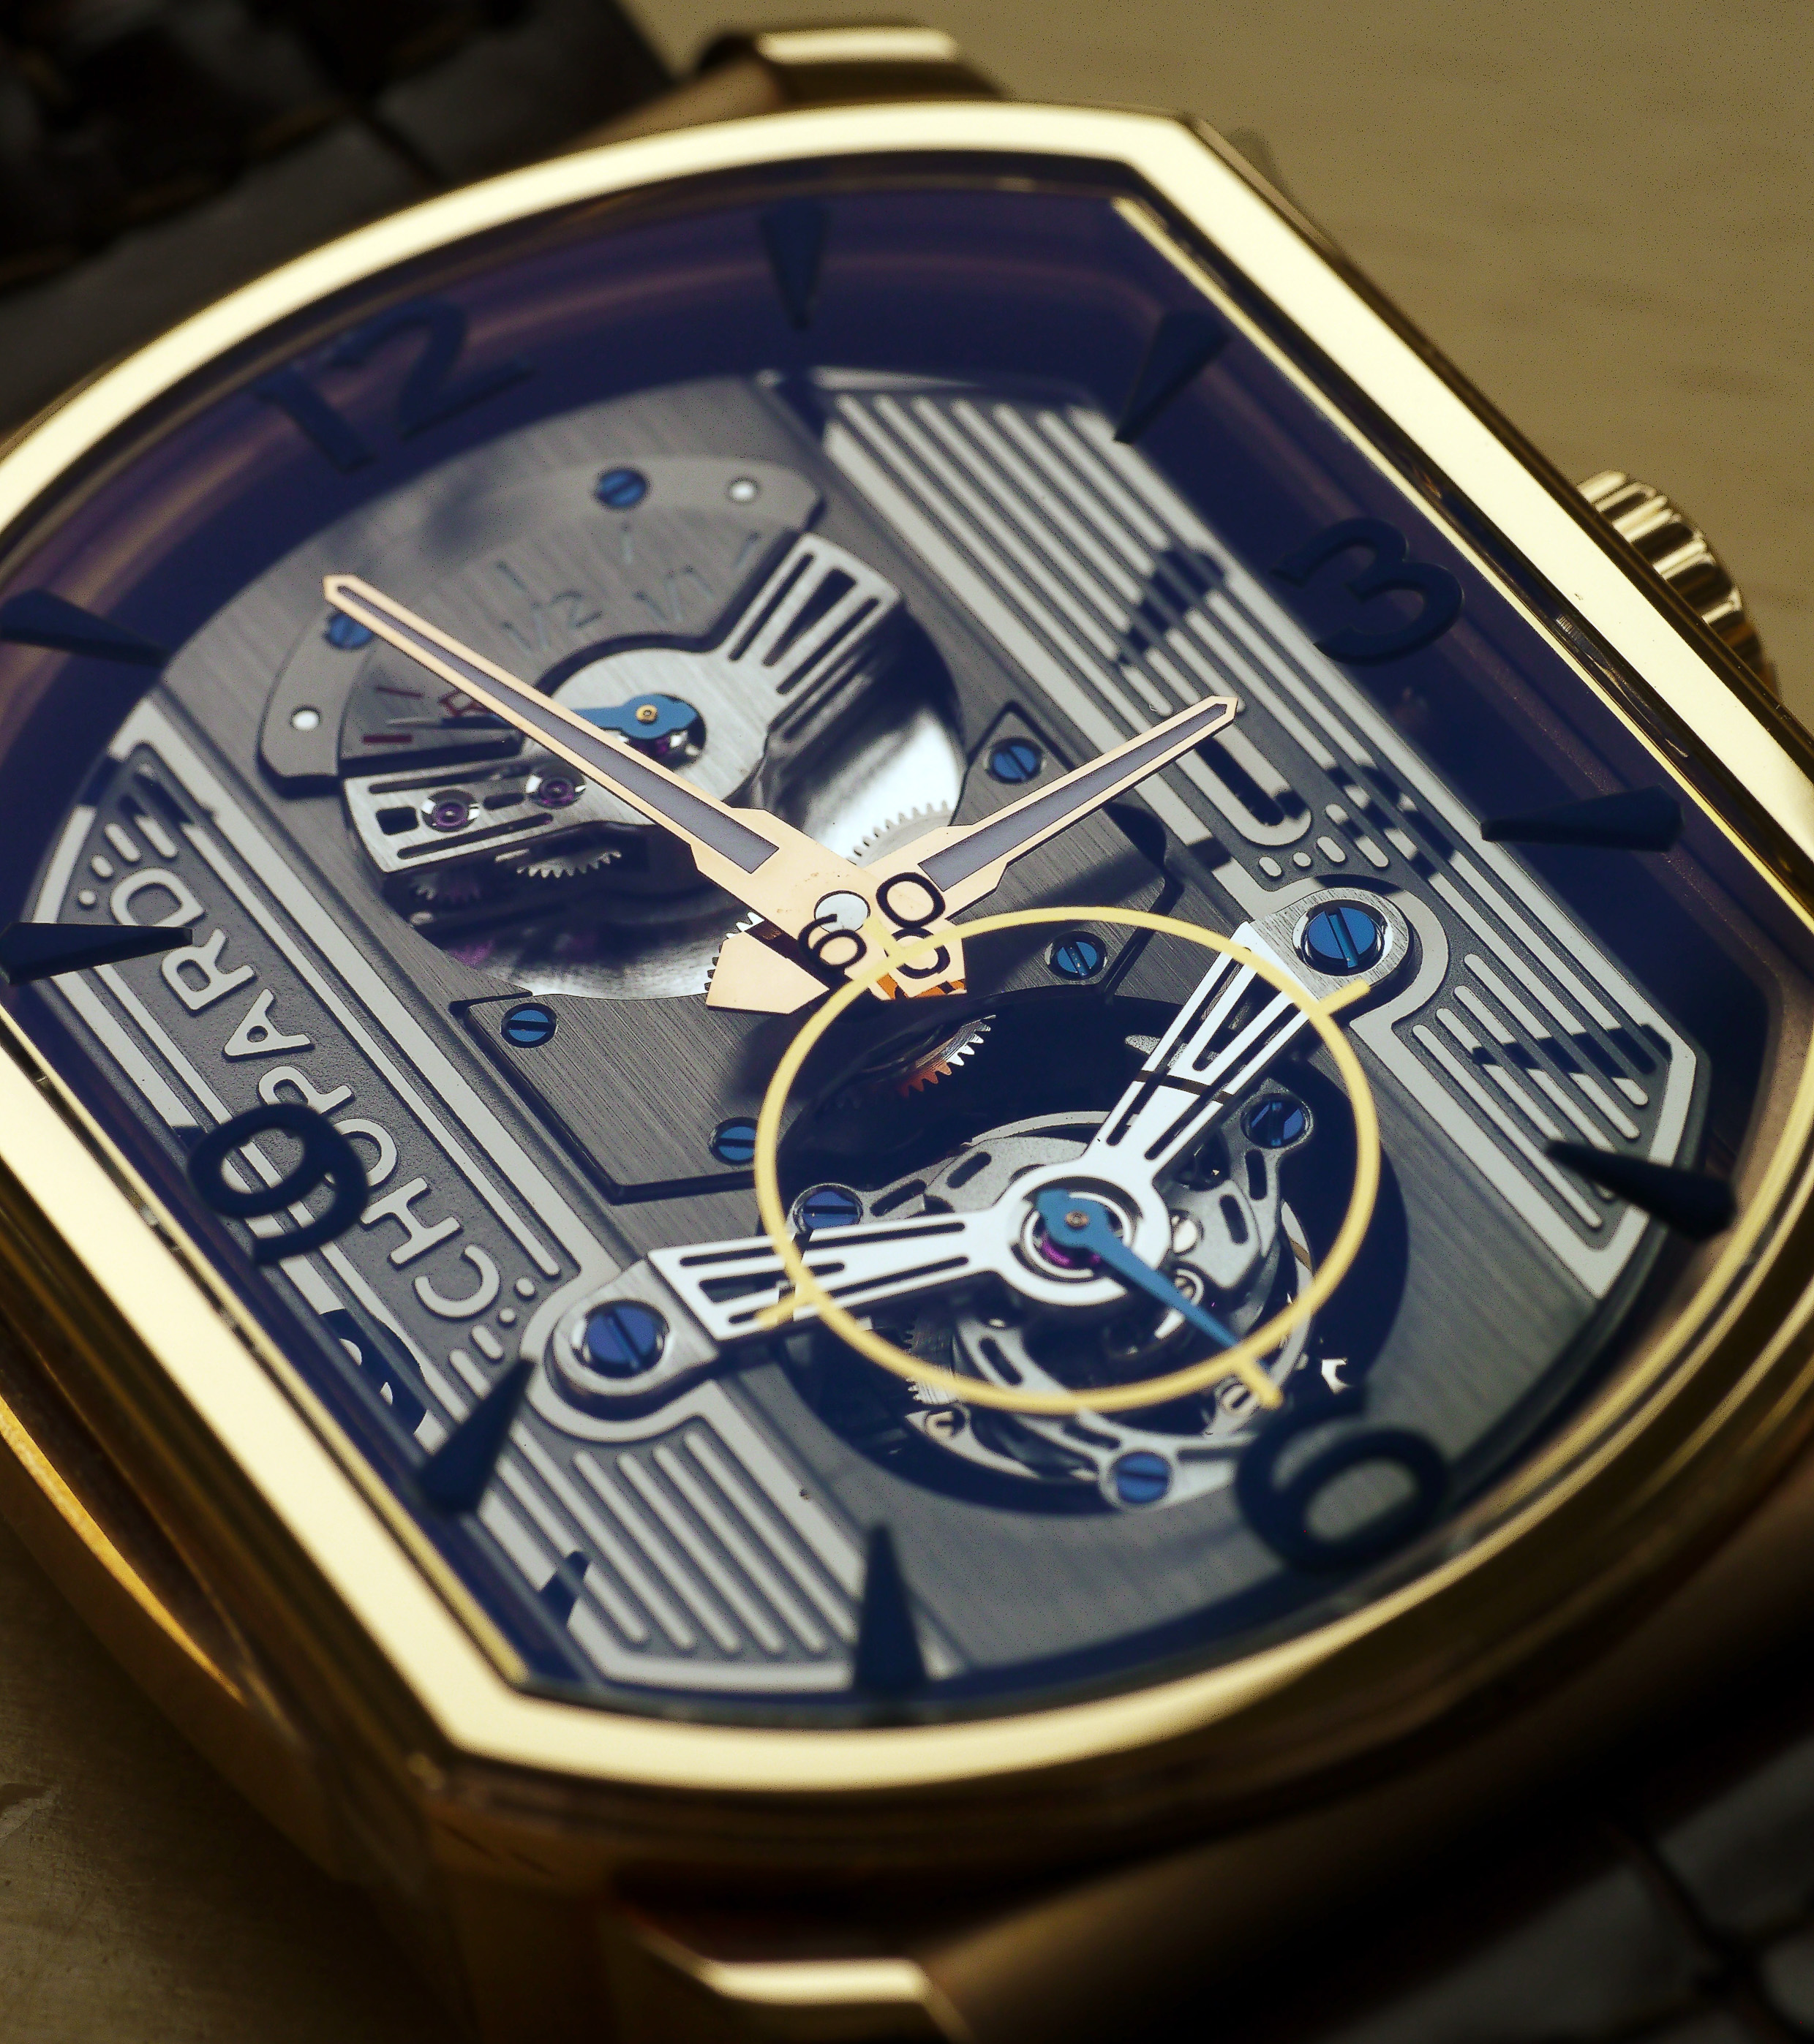 In our opinion, the Engine One Tourbillon would be a conversational piece, thanks to its unique facade.